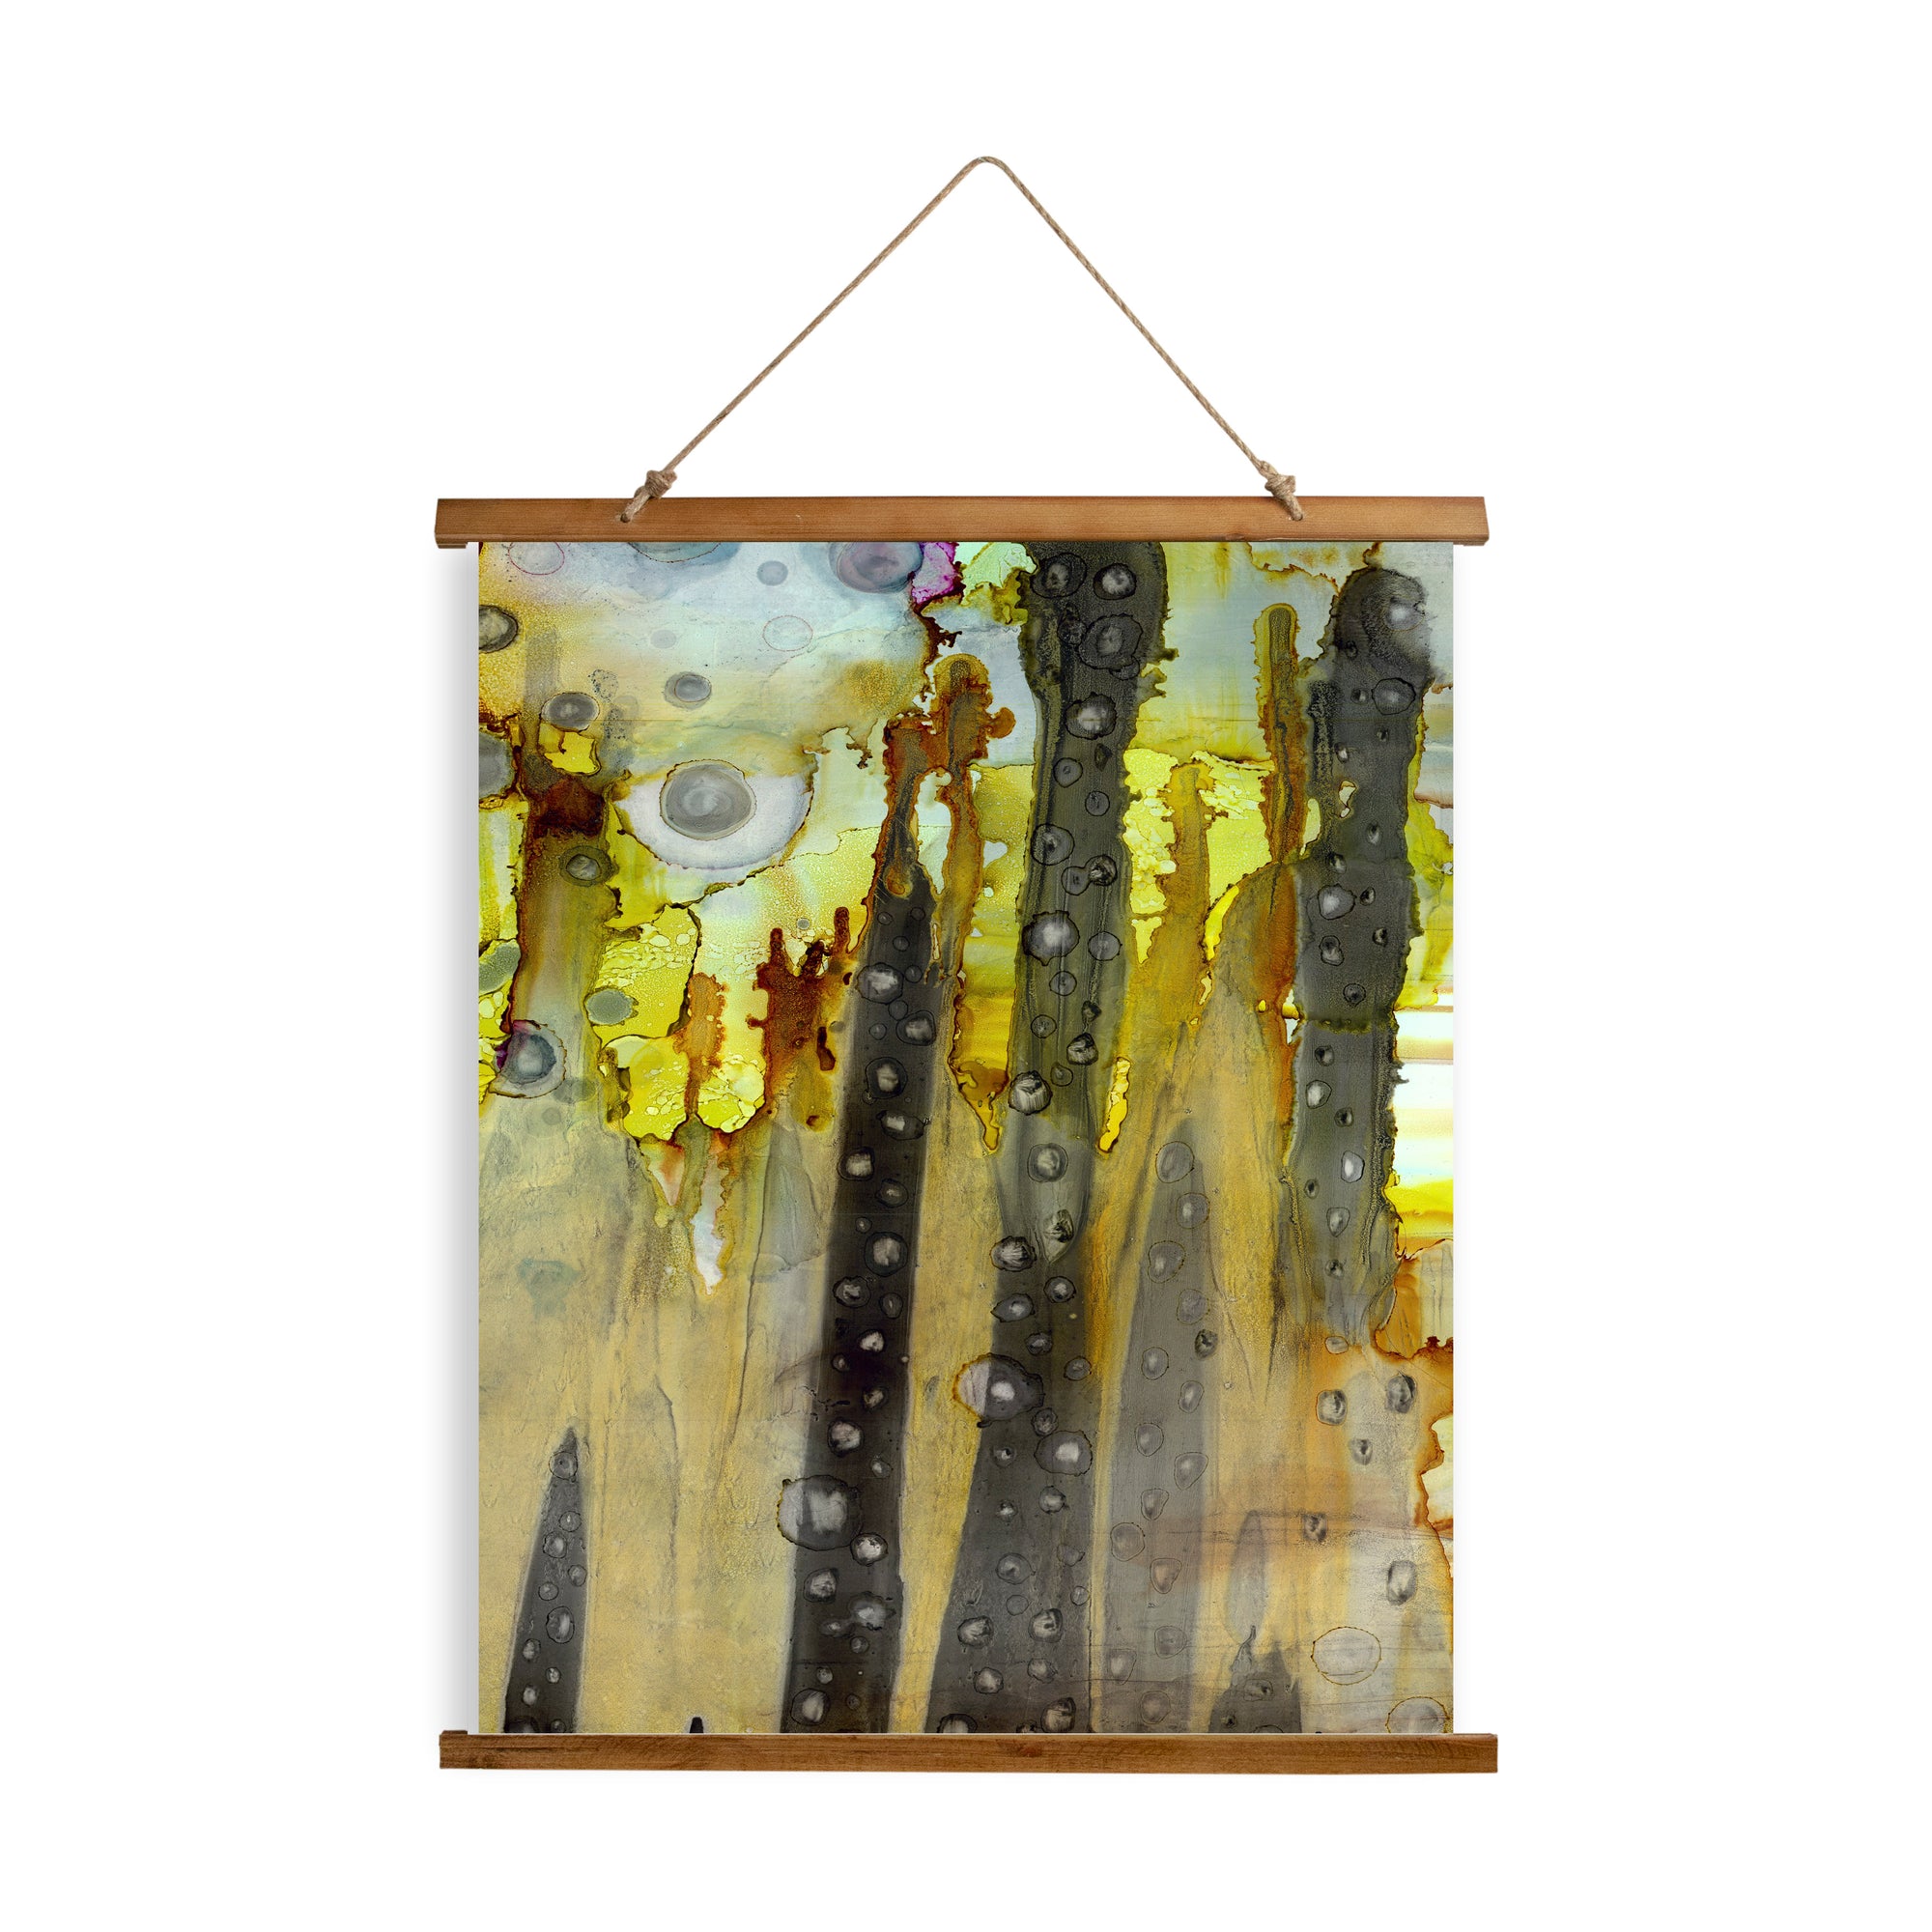 Whimsical Wood Slat Tapestry "The Cave"